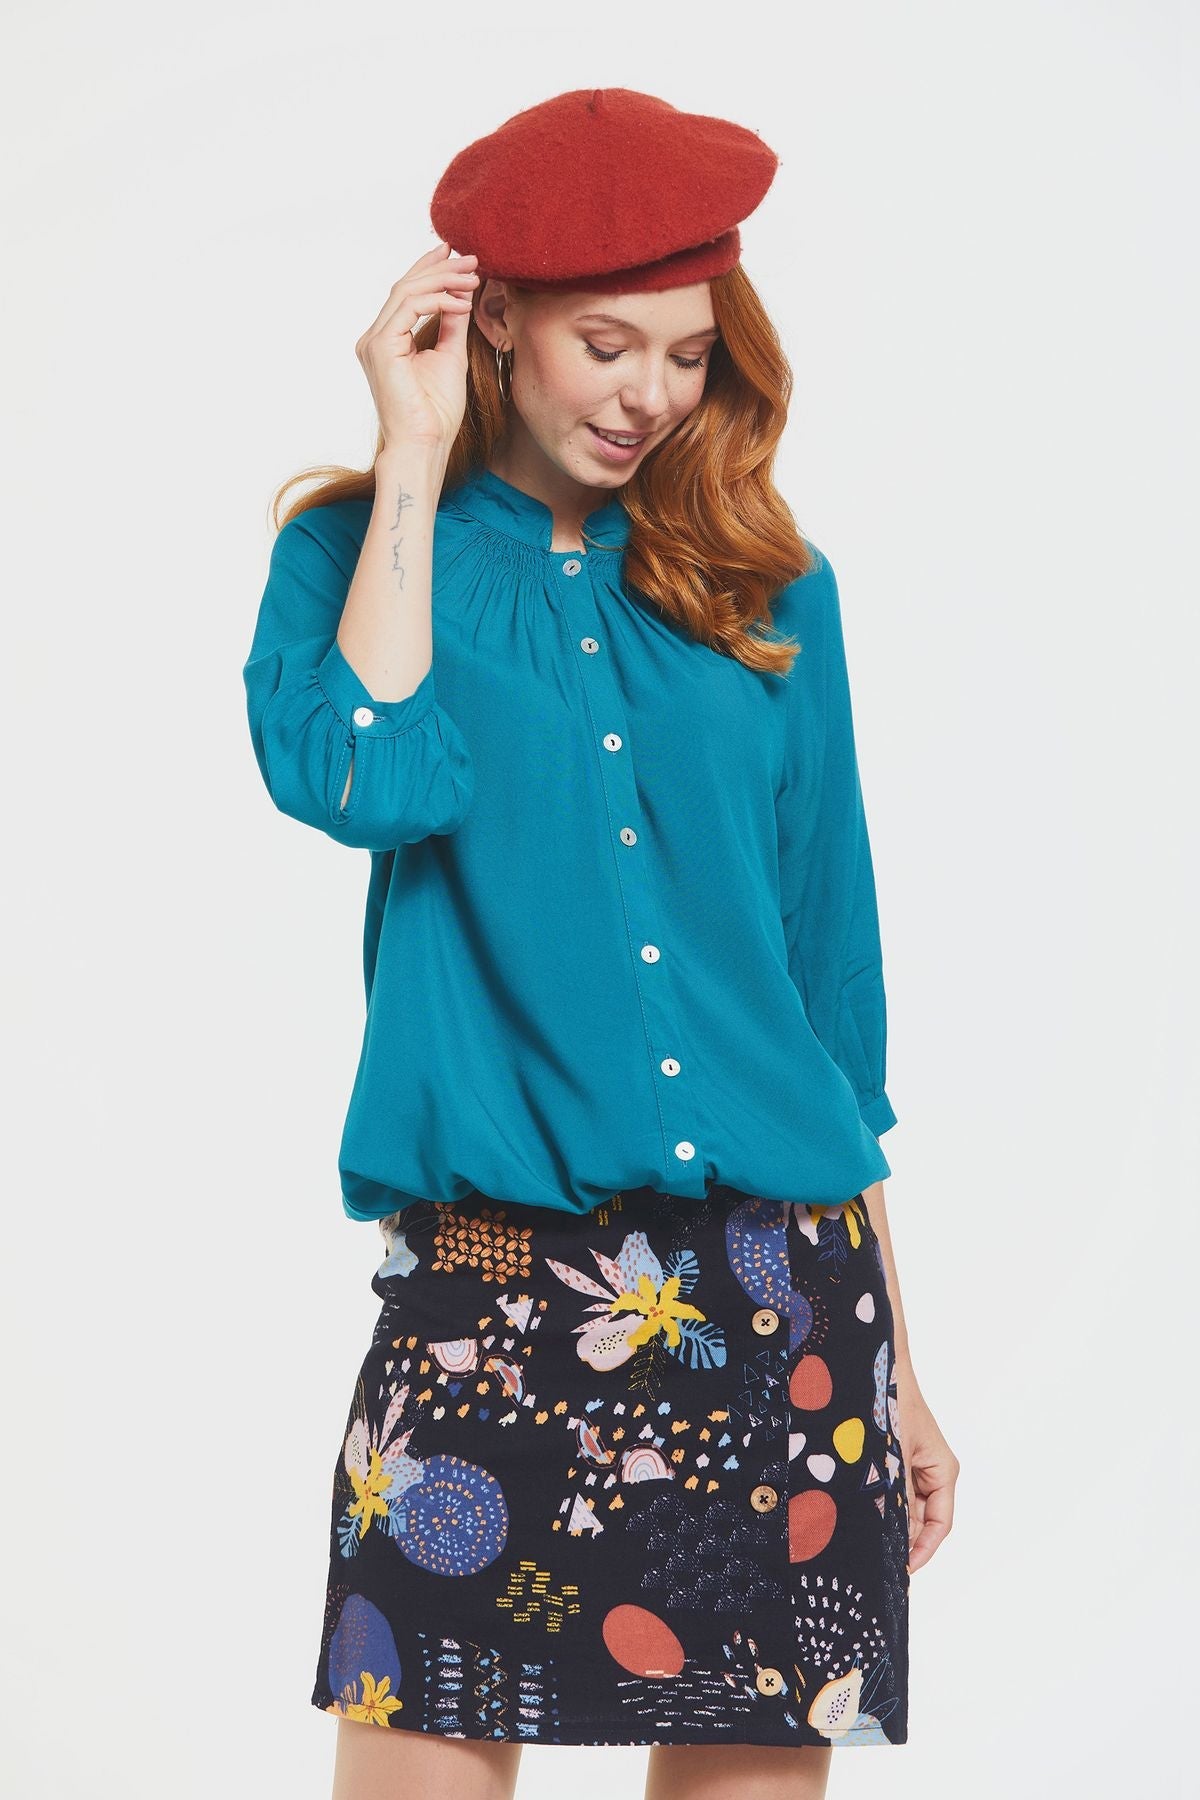 Loose Fit Women's Shirt with Band Collar Turquoise